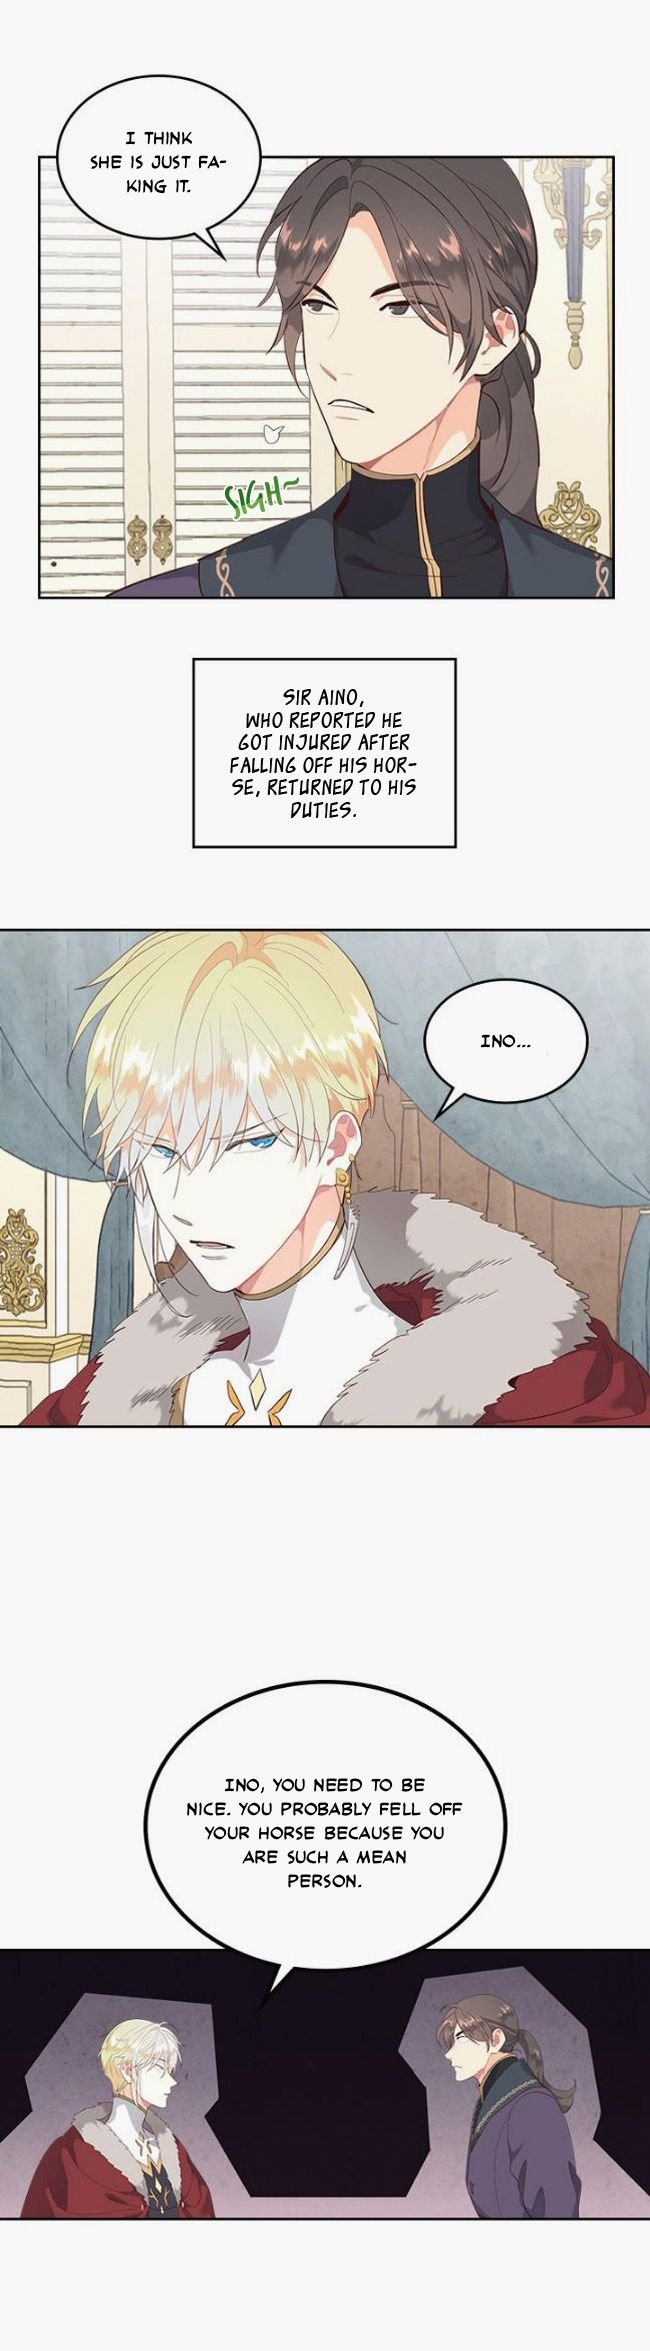 Emperor And The Female Knight ( The King and His Knight ) Chapter 94 - Page 1